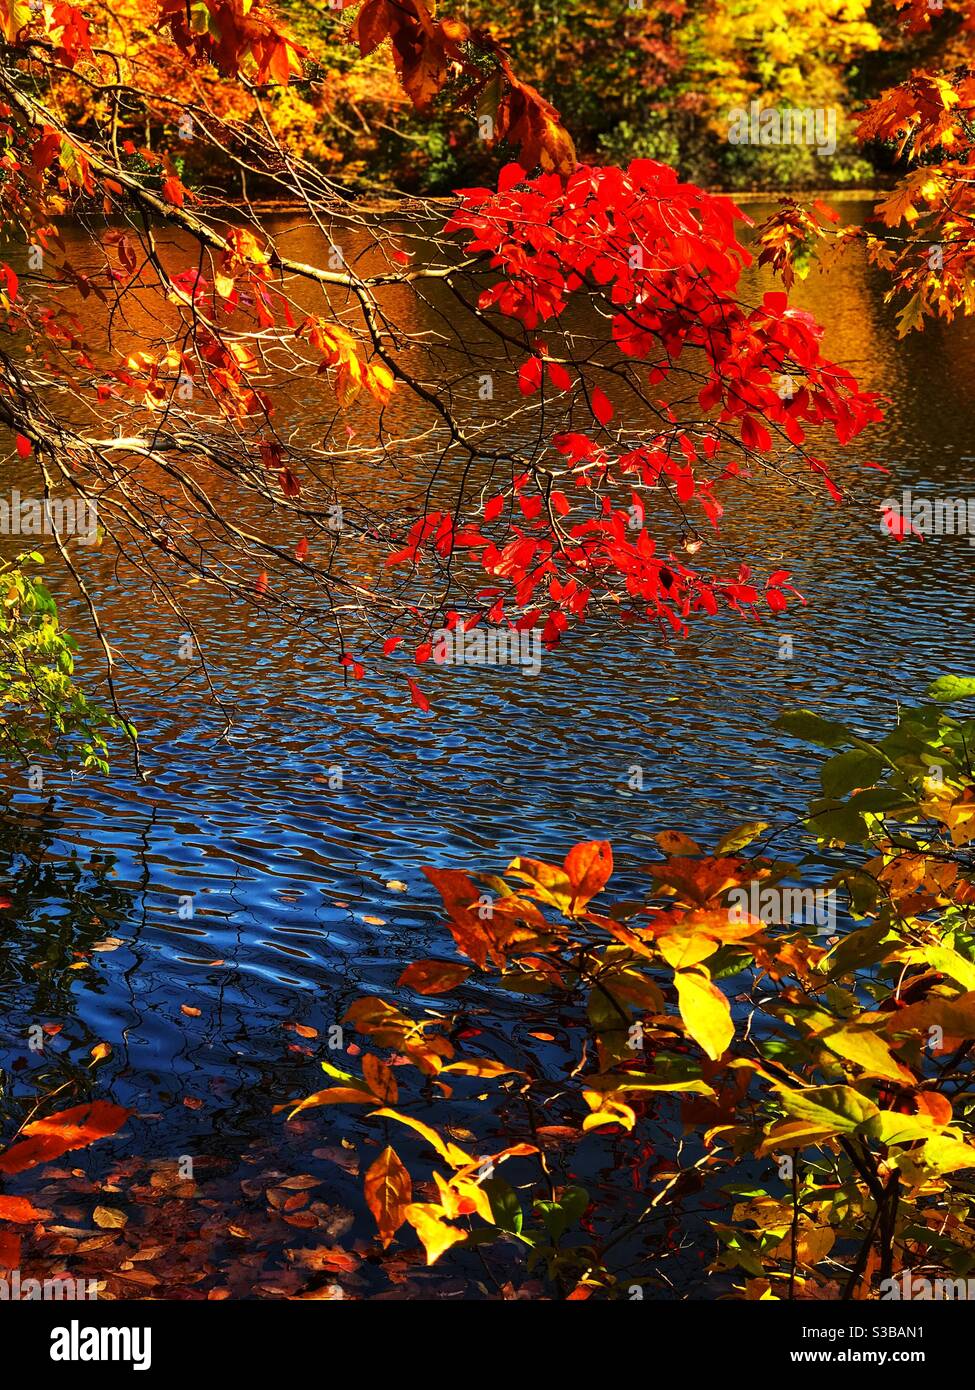 Fall colors in the park. Stock Photo